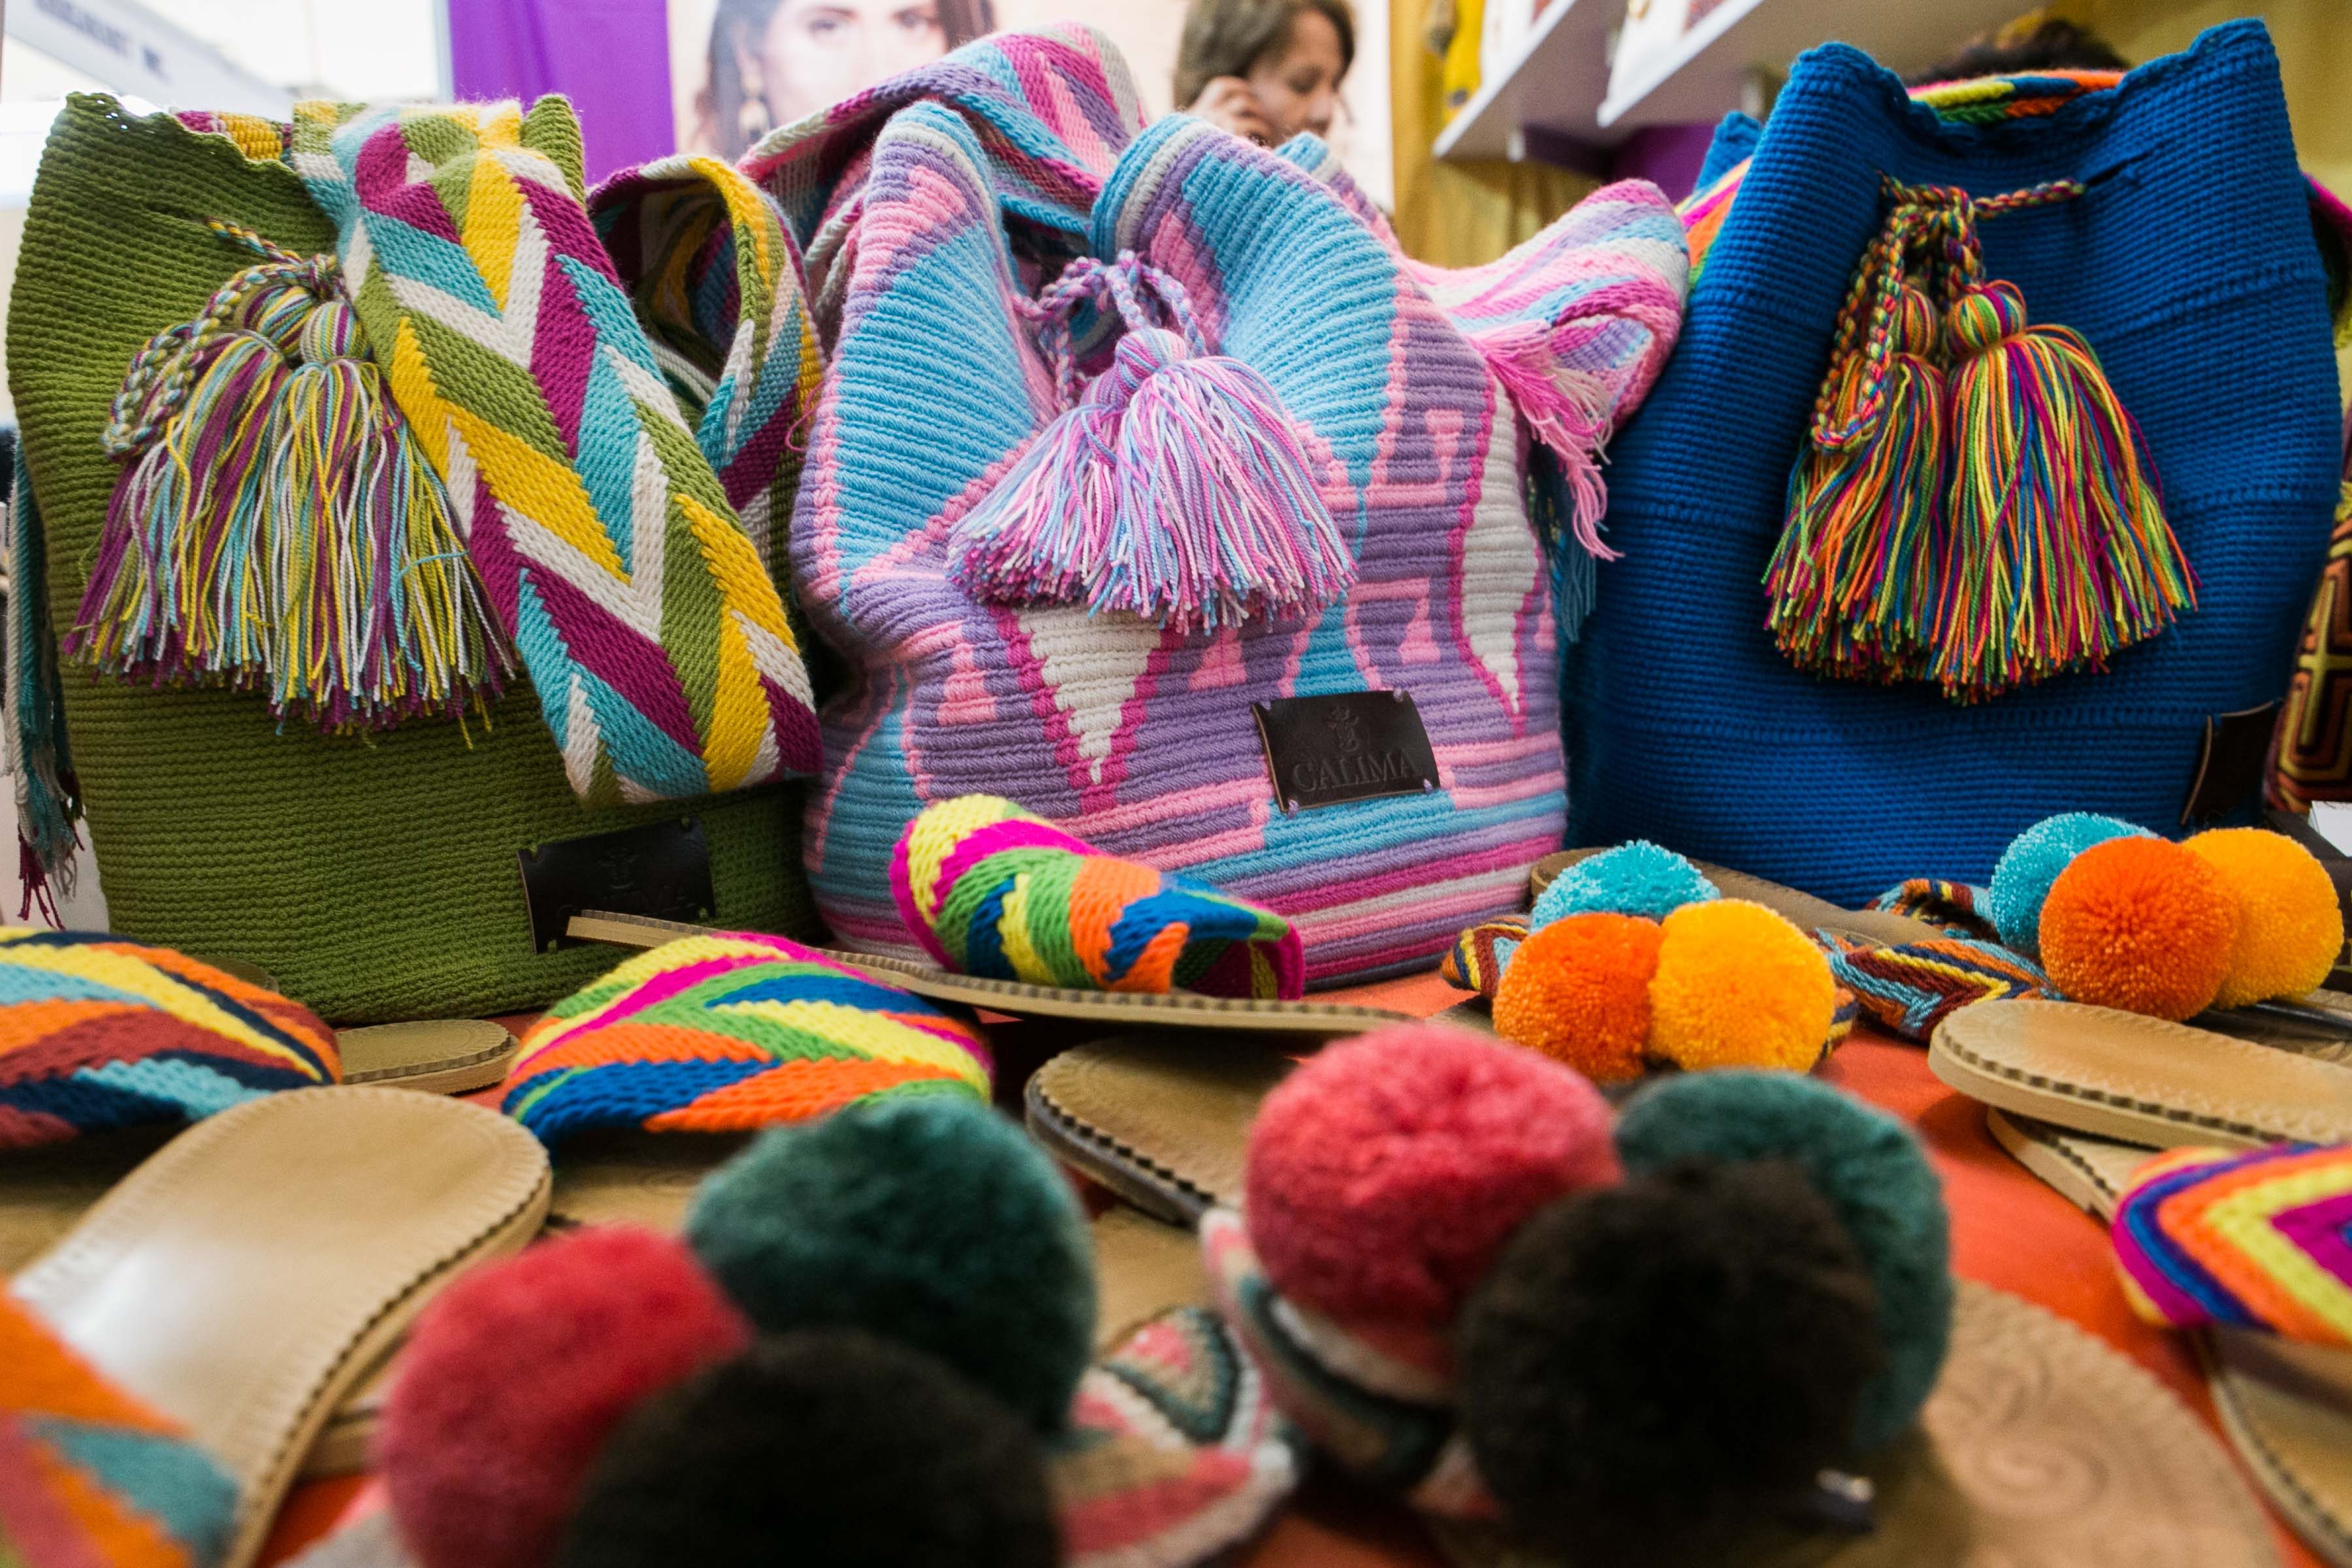 MOCHILA. These bags and sandals were handmade by the Wayuu tribe in Colombia. Parts of Calima's profits go to the community there. According to Hernandez, most of the women there earn money through woven products. Photo by Pat Nabong/Rappler